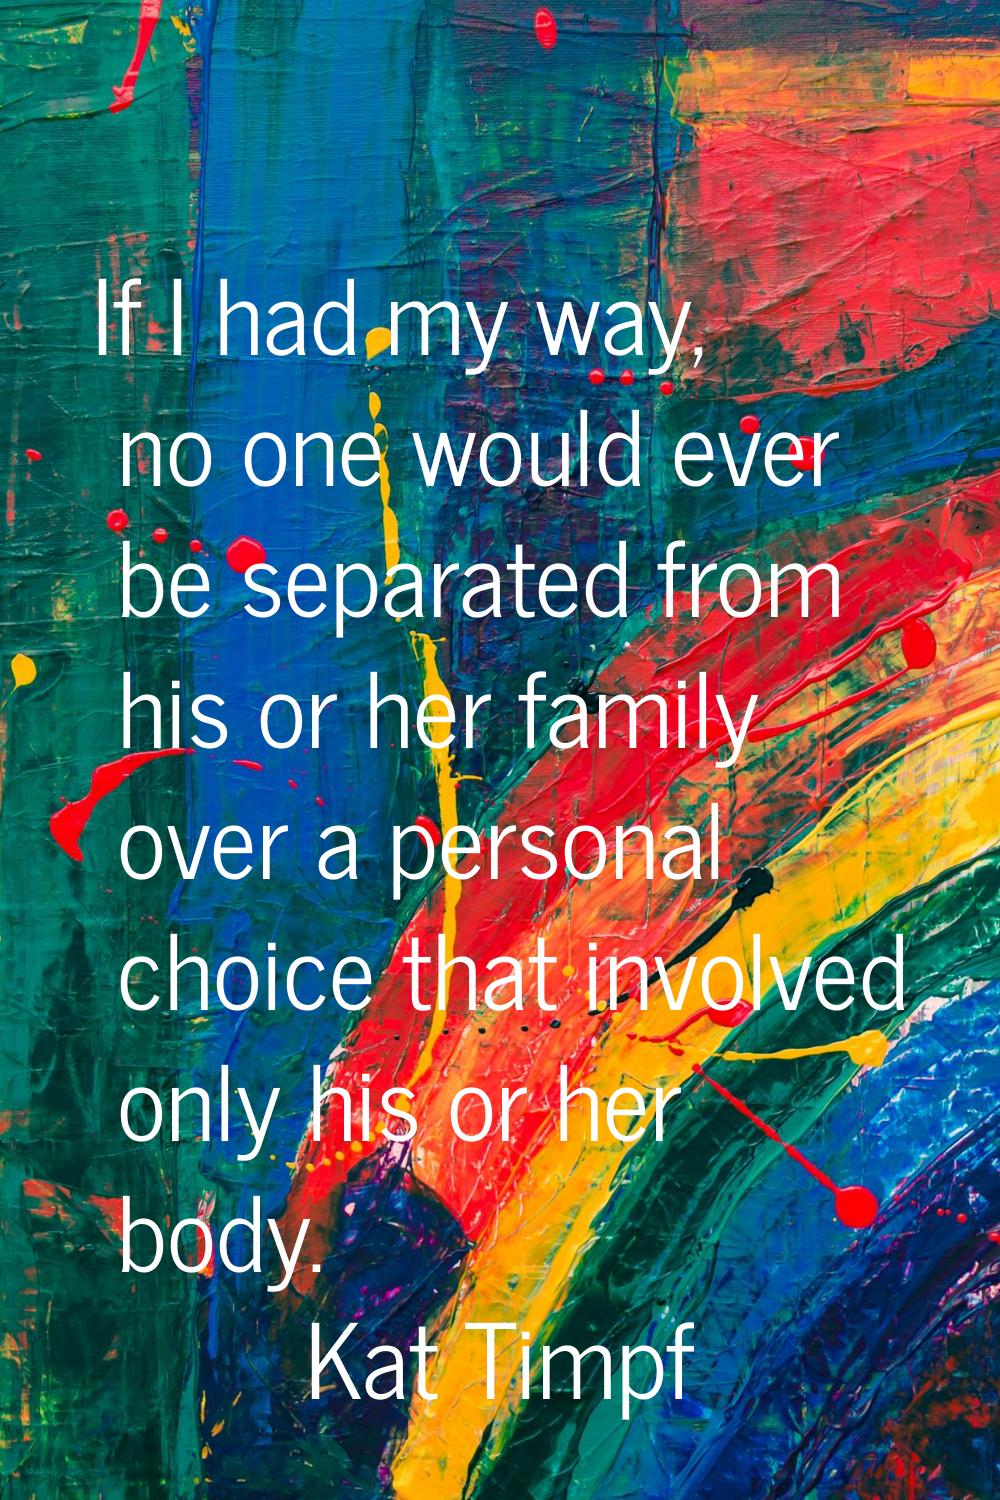 If I had my way, no one would ever be separated from his or her family over a personal choice that 